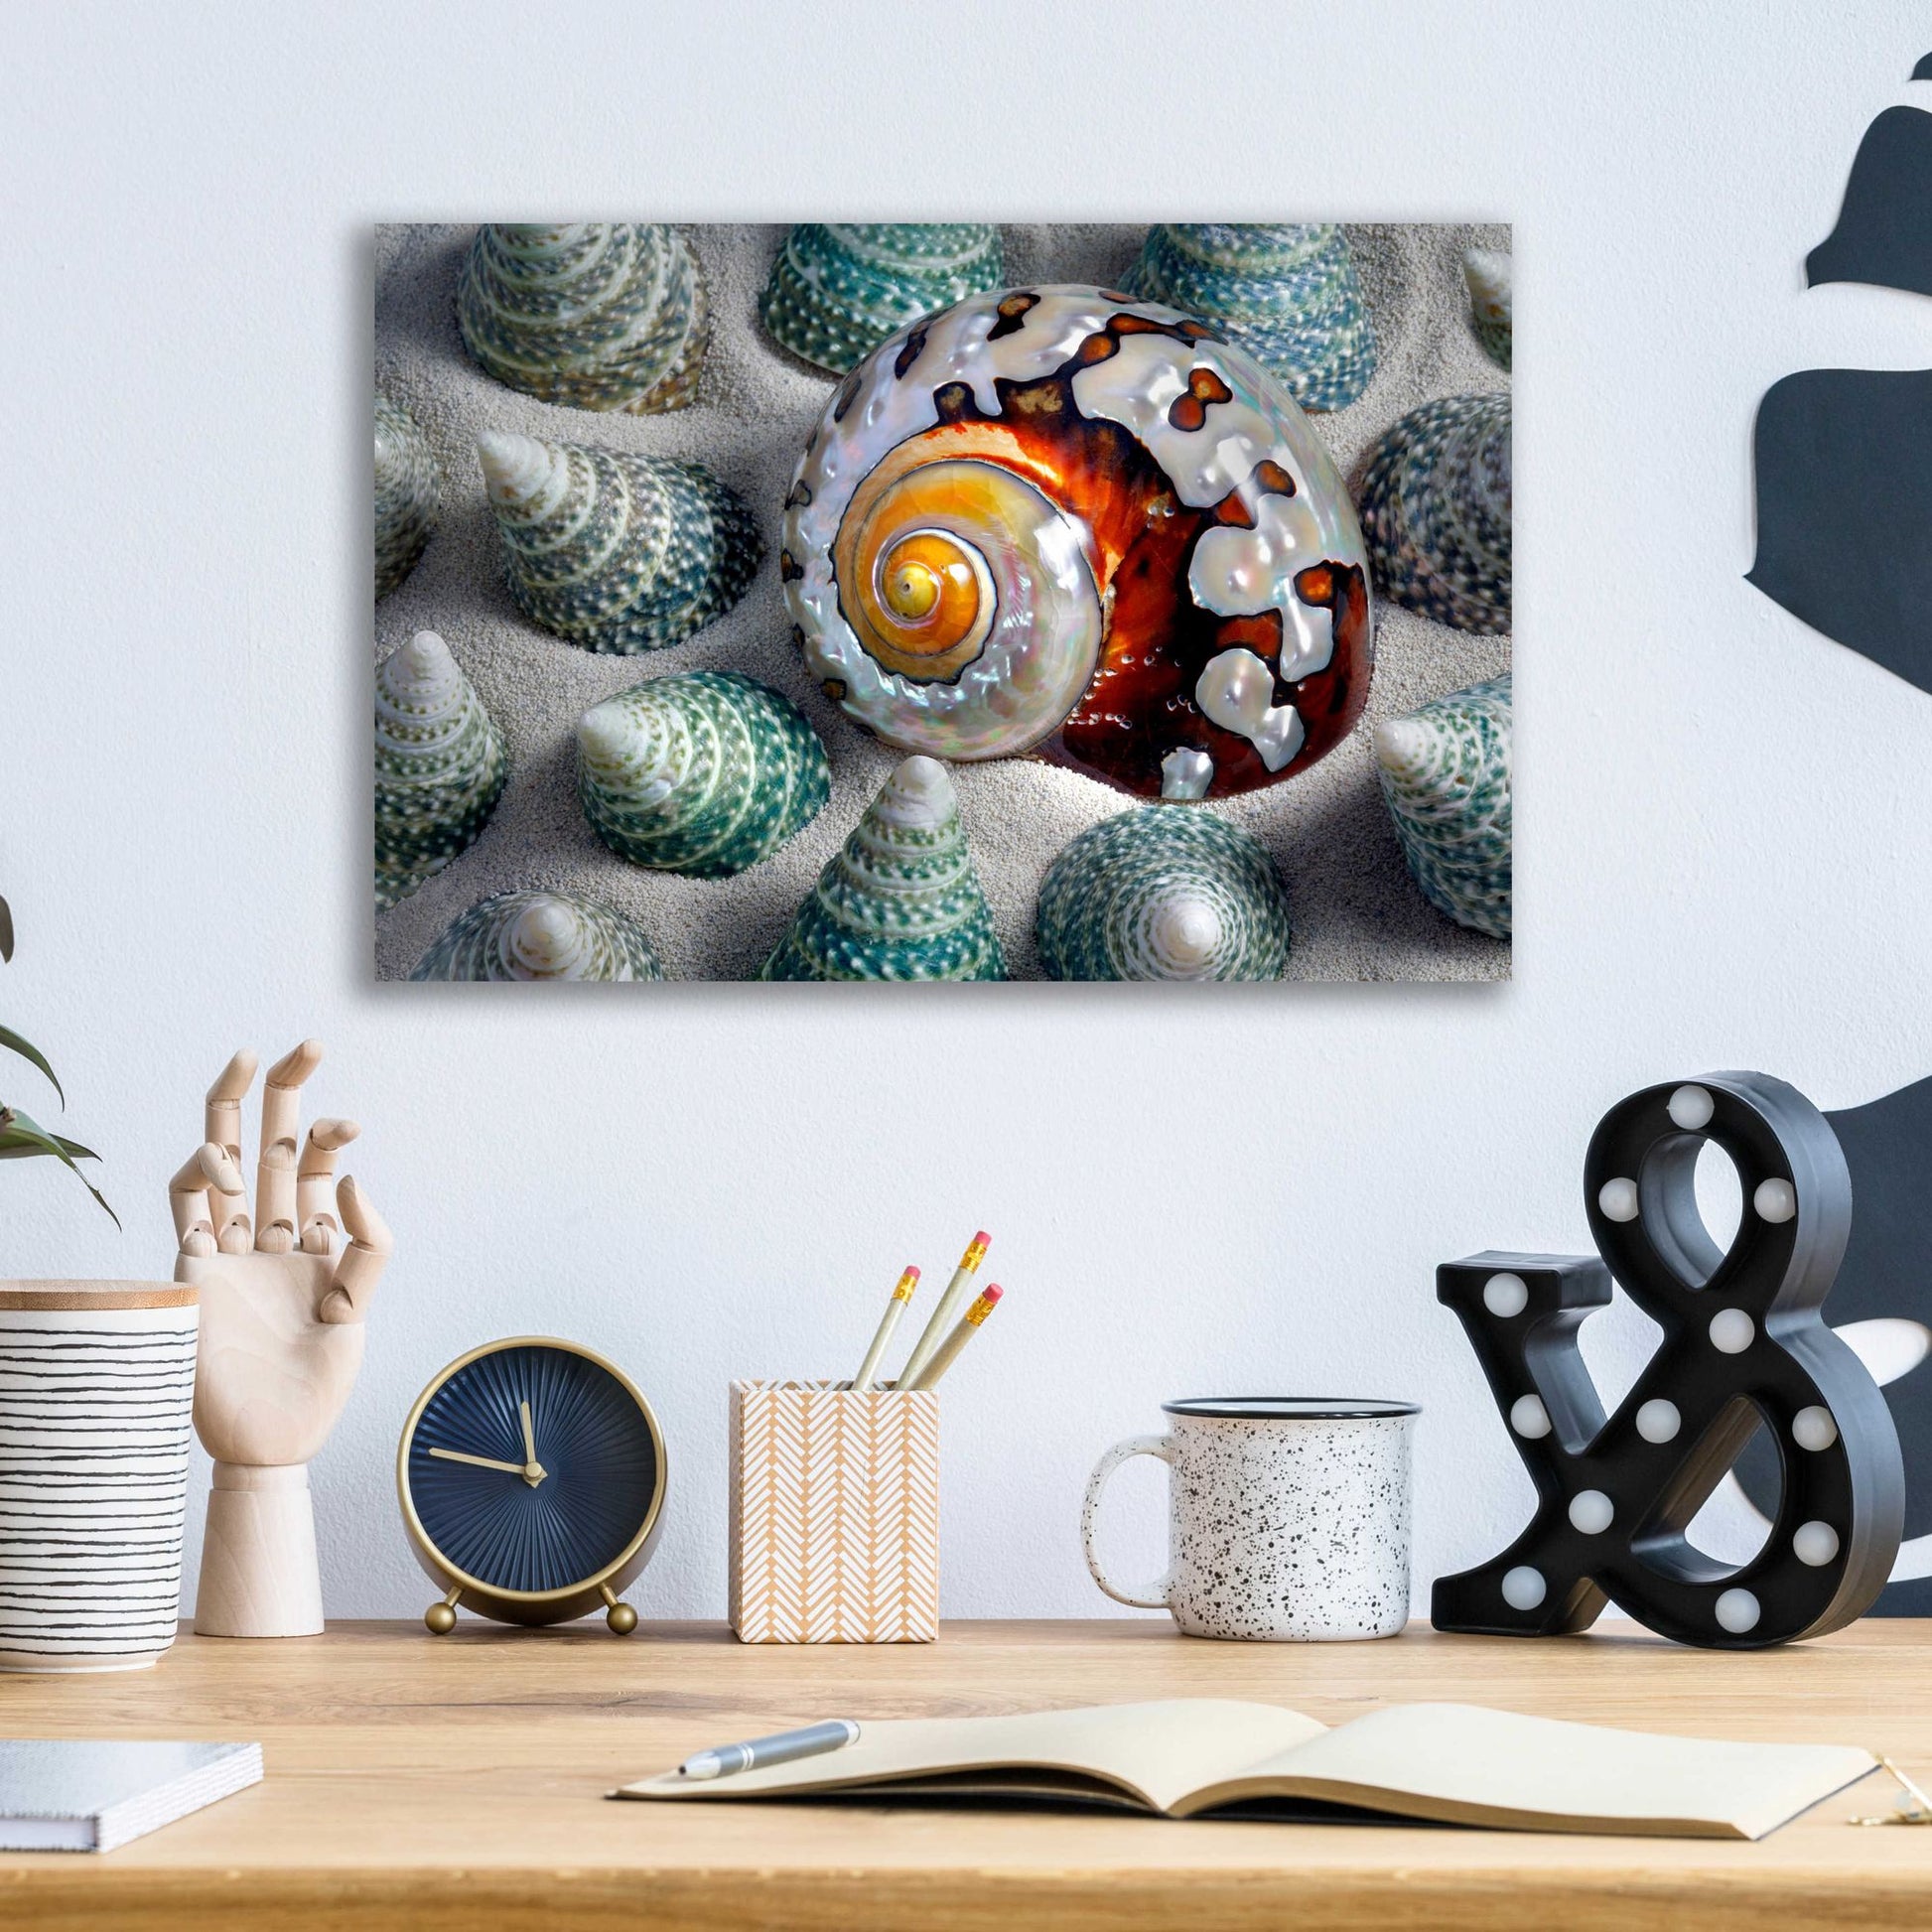 Epic Art 'Shell Spiral' by Dennis Frates, Acrylic Glass Wall Art,16x12